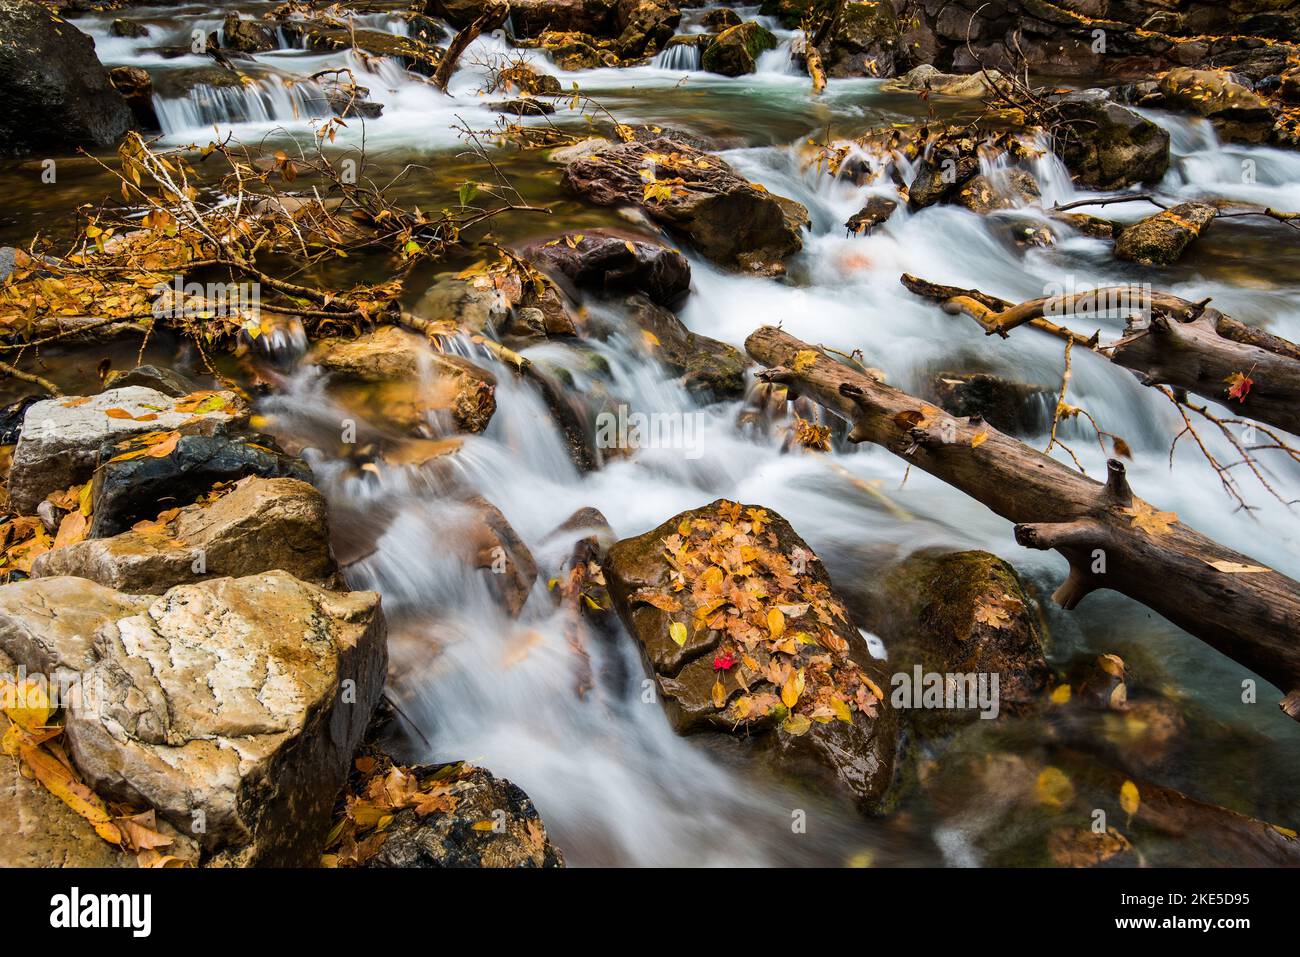 Cascading mountain stream with fallen autumn leaves.  Nature creates additional beauty after the leaves have fallen.  Forest floor is another pallet. Stock Photo